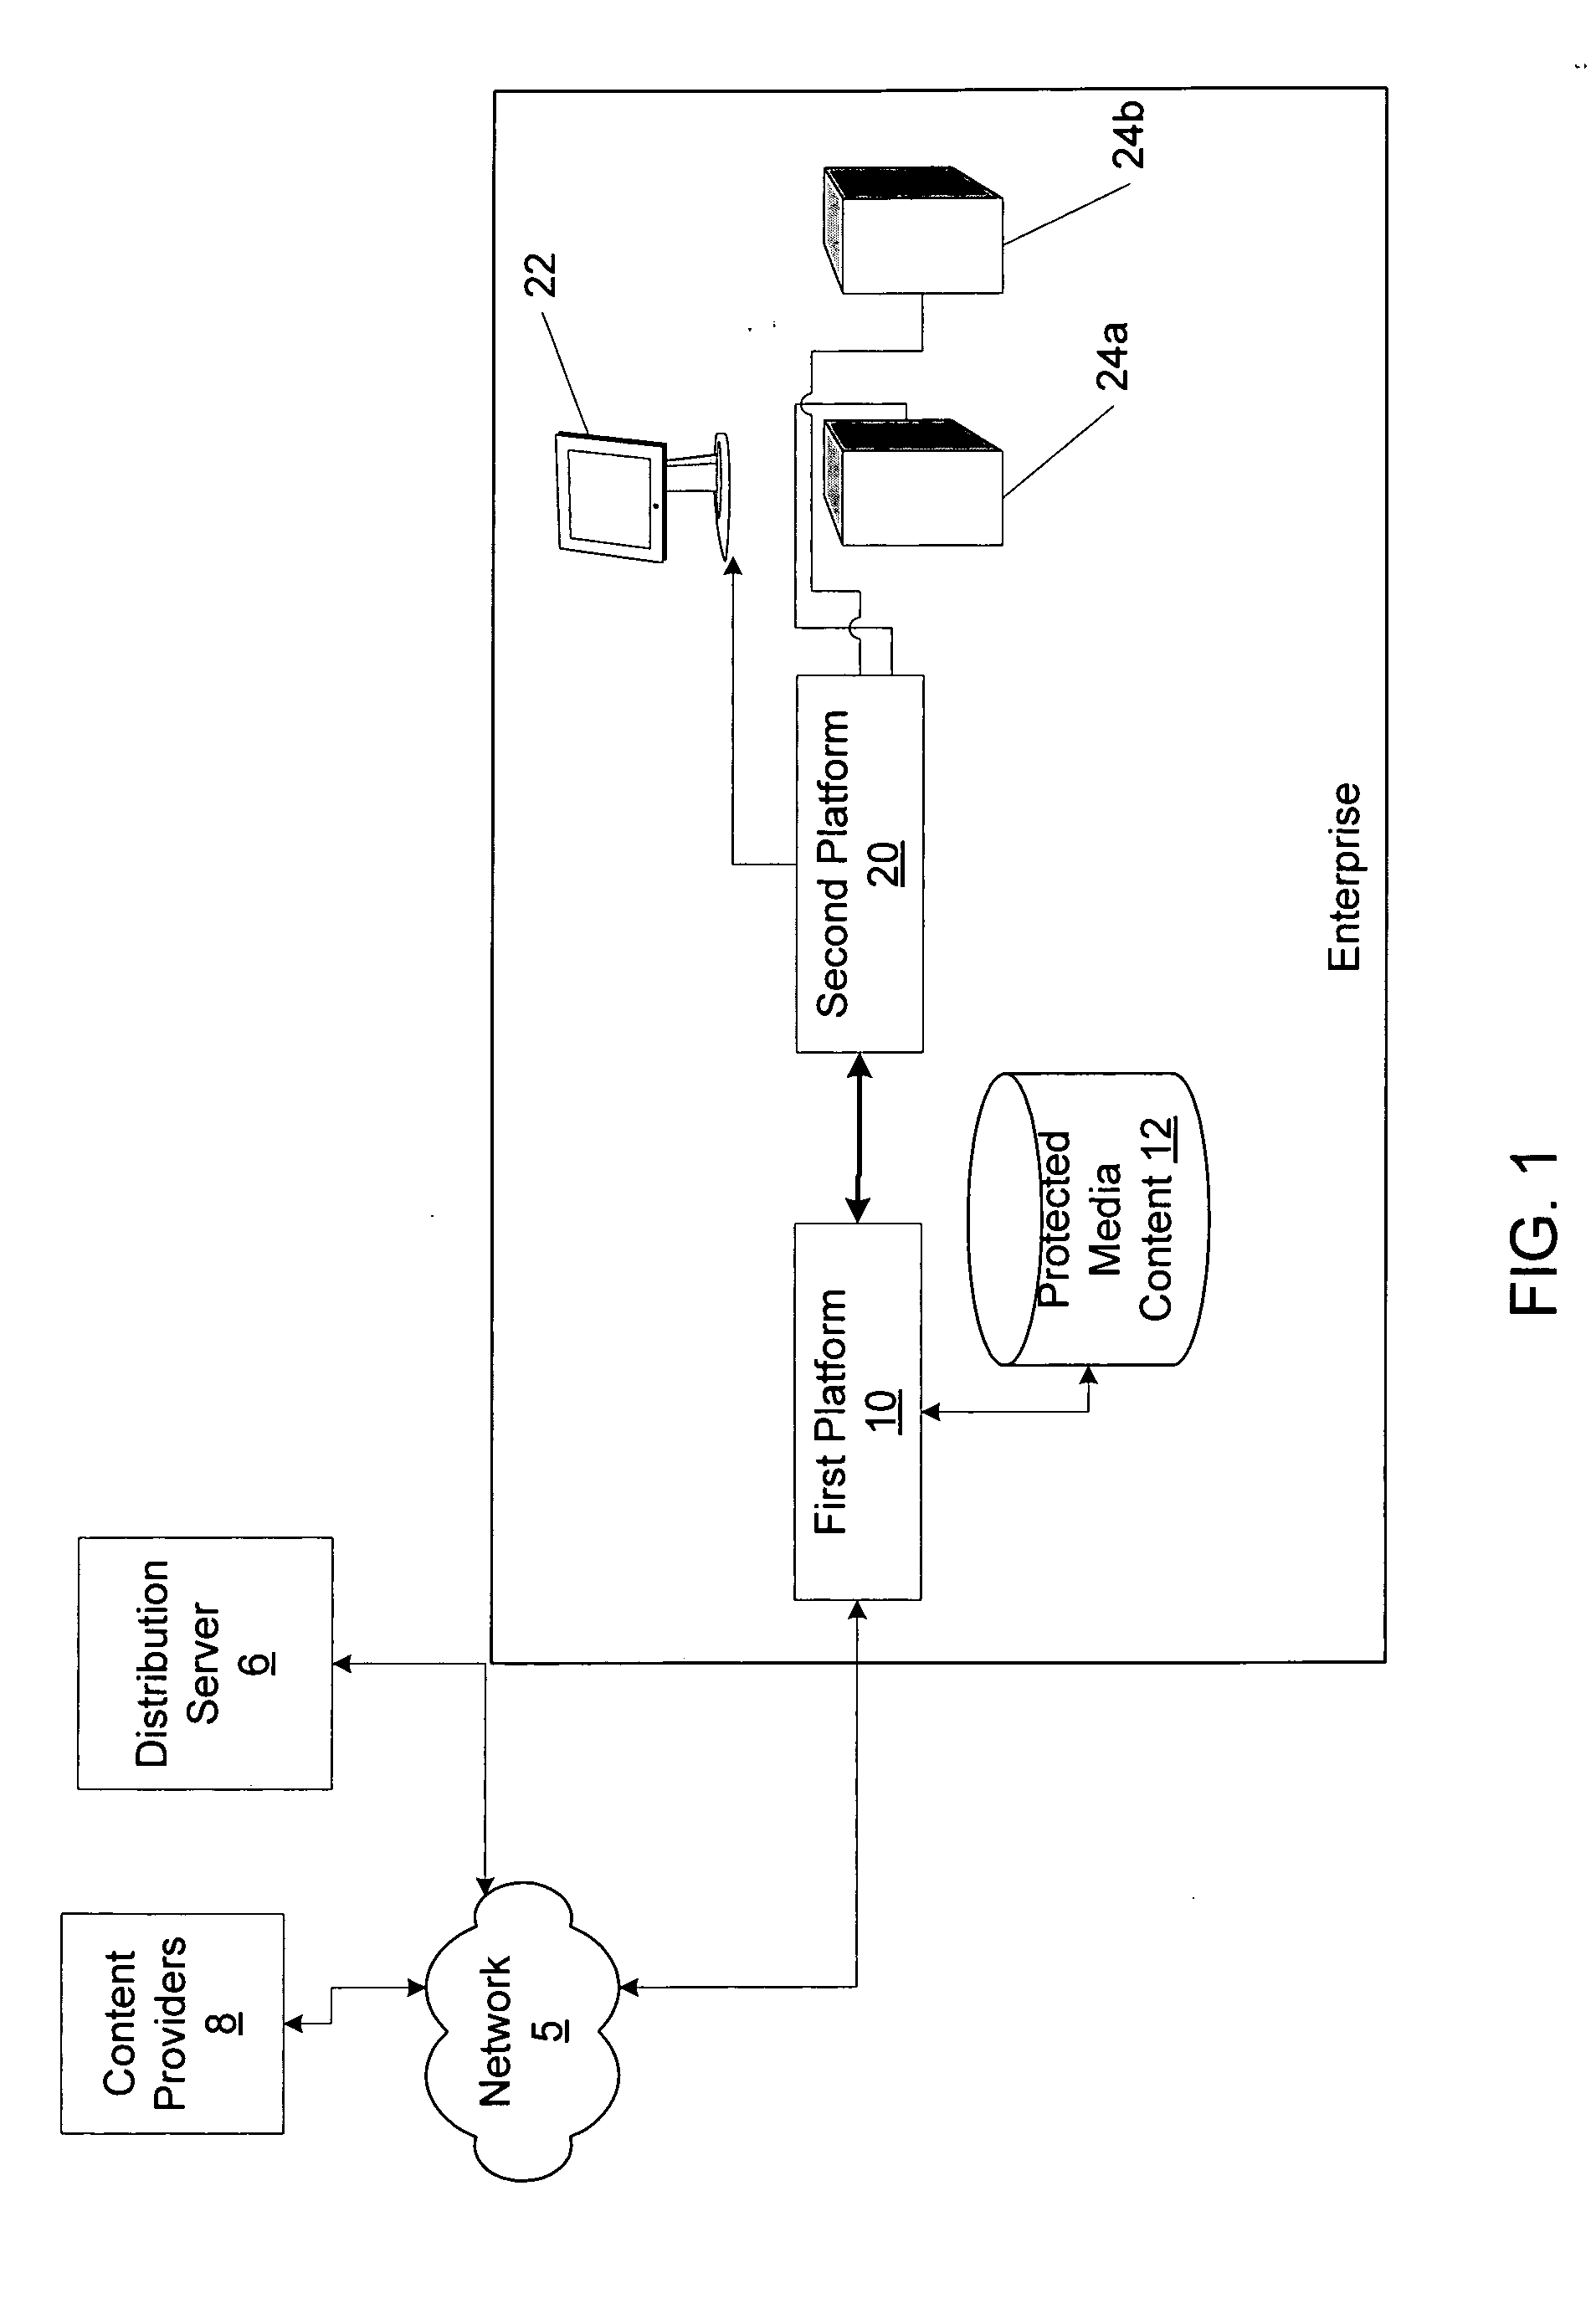 Method and apparatus for distributing media in a pay per play architecture with remote playback within an enterprise